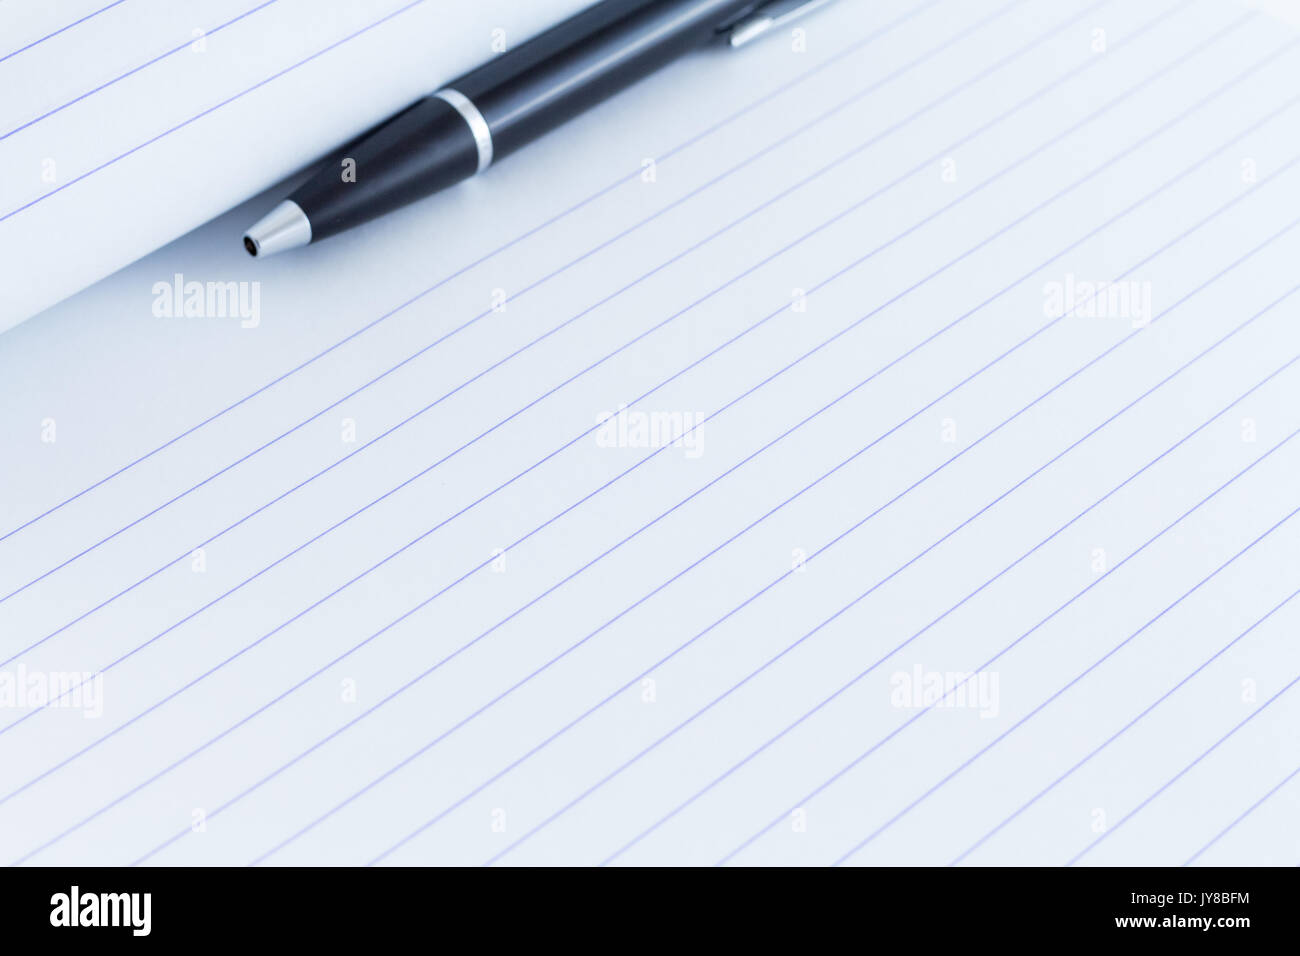 black writing pen on lines paper for writing Stock Photo